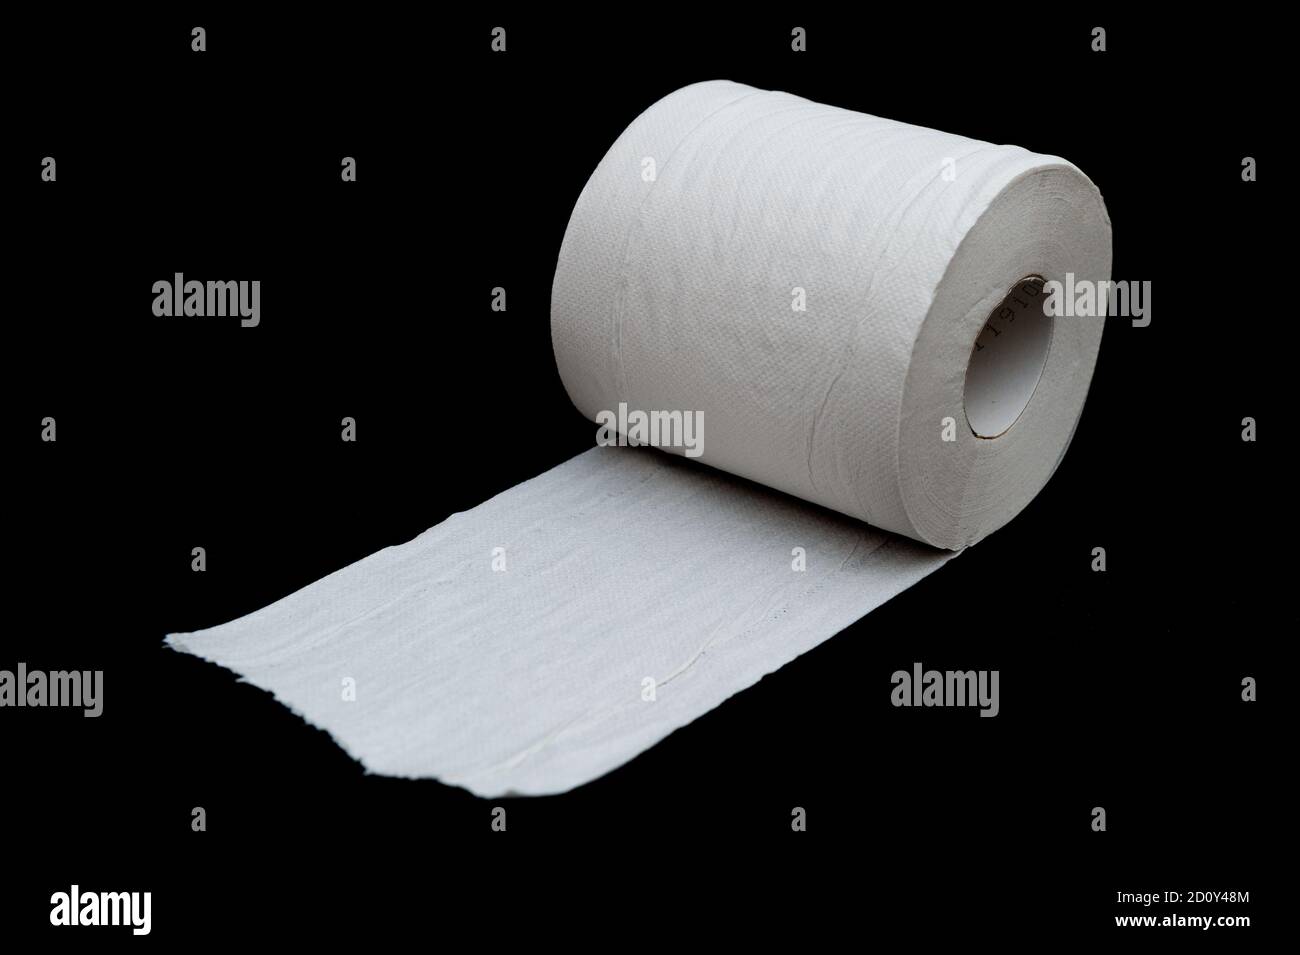 Circumference of a toilet paper tube